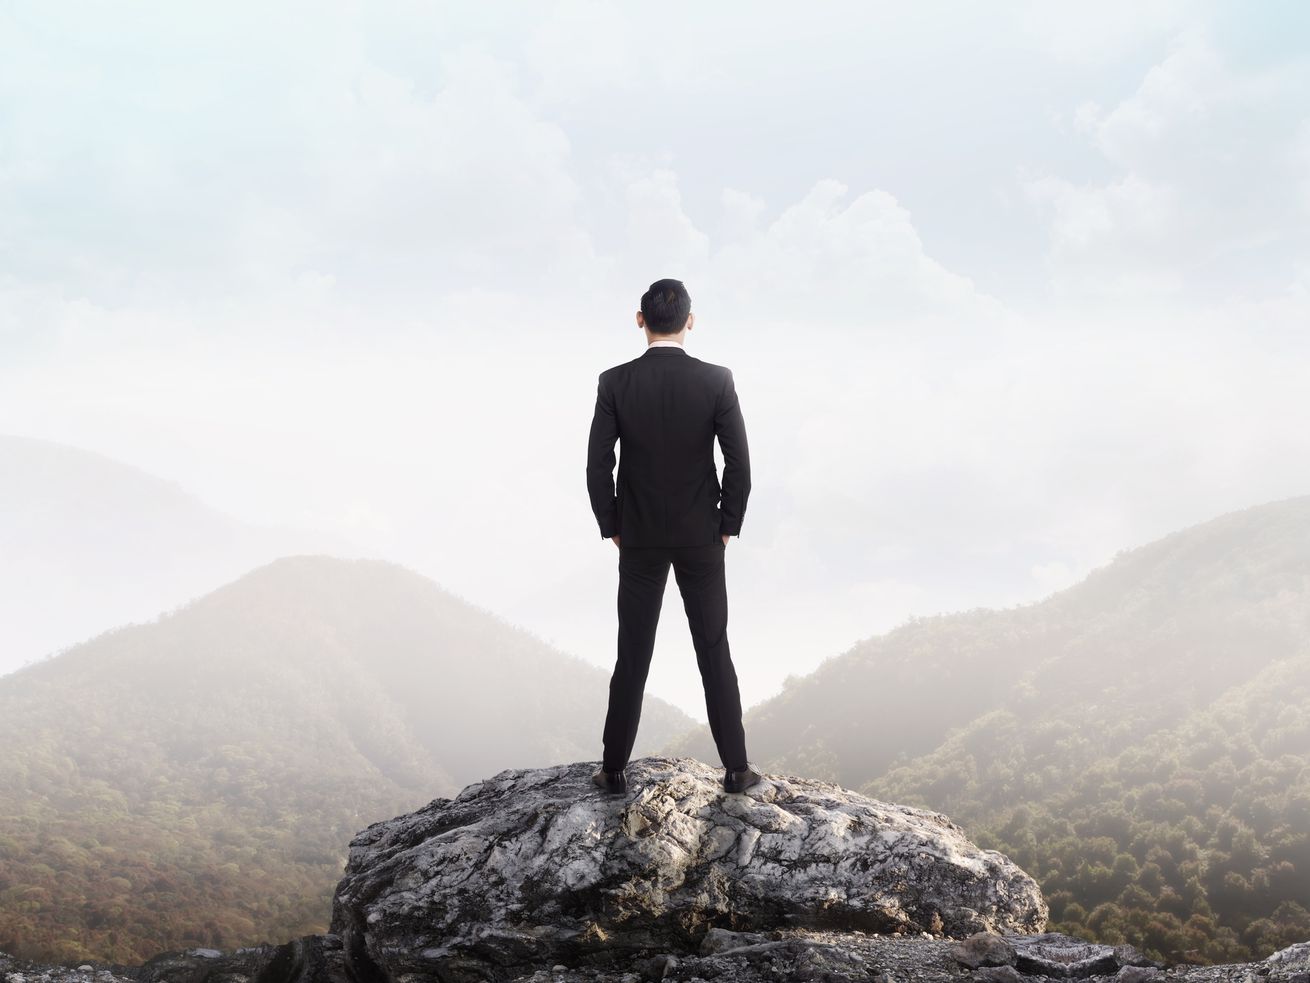 A stock image of a man in a business suit, hands in pockets, standing on a cliff and looking at the mountains in the distance.